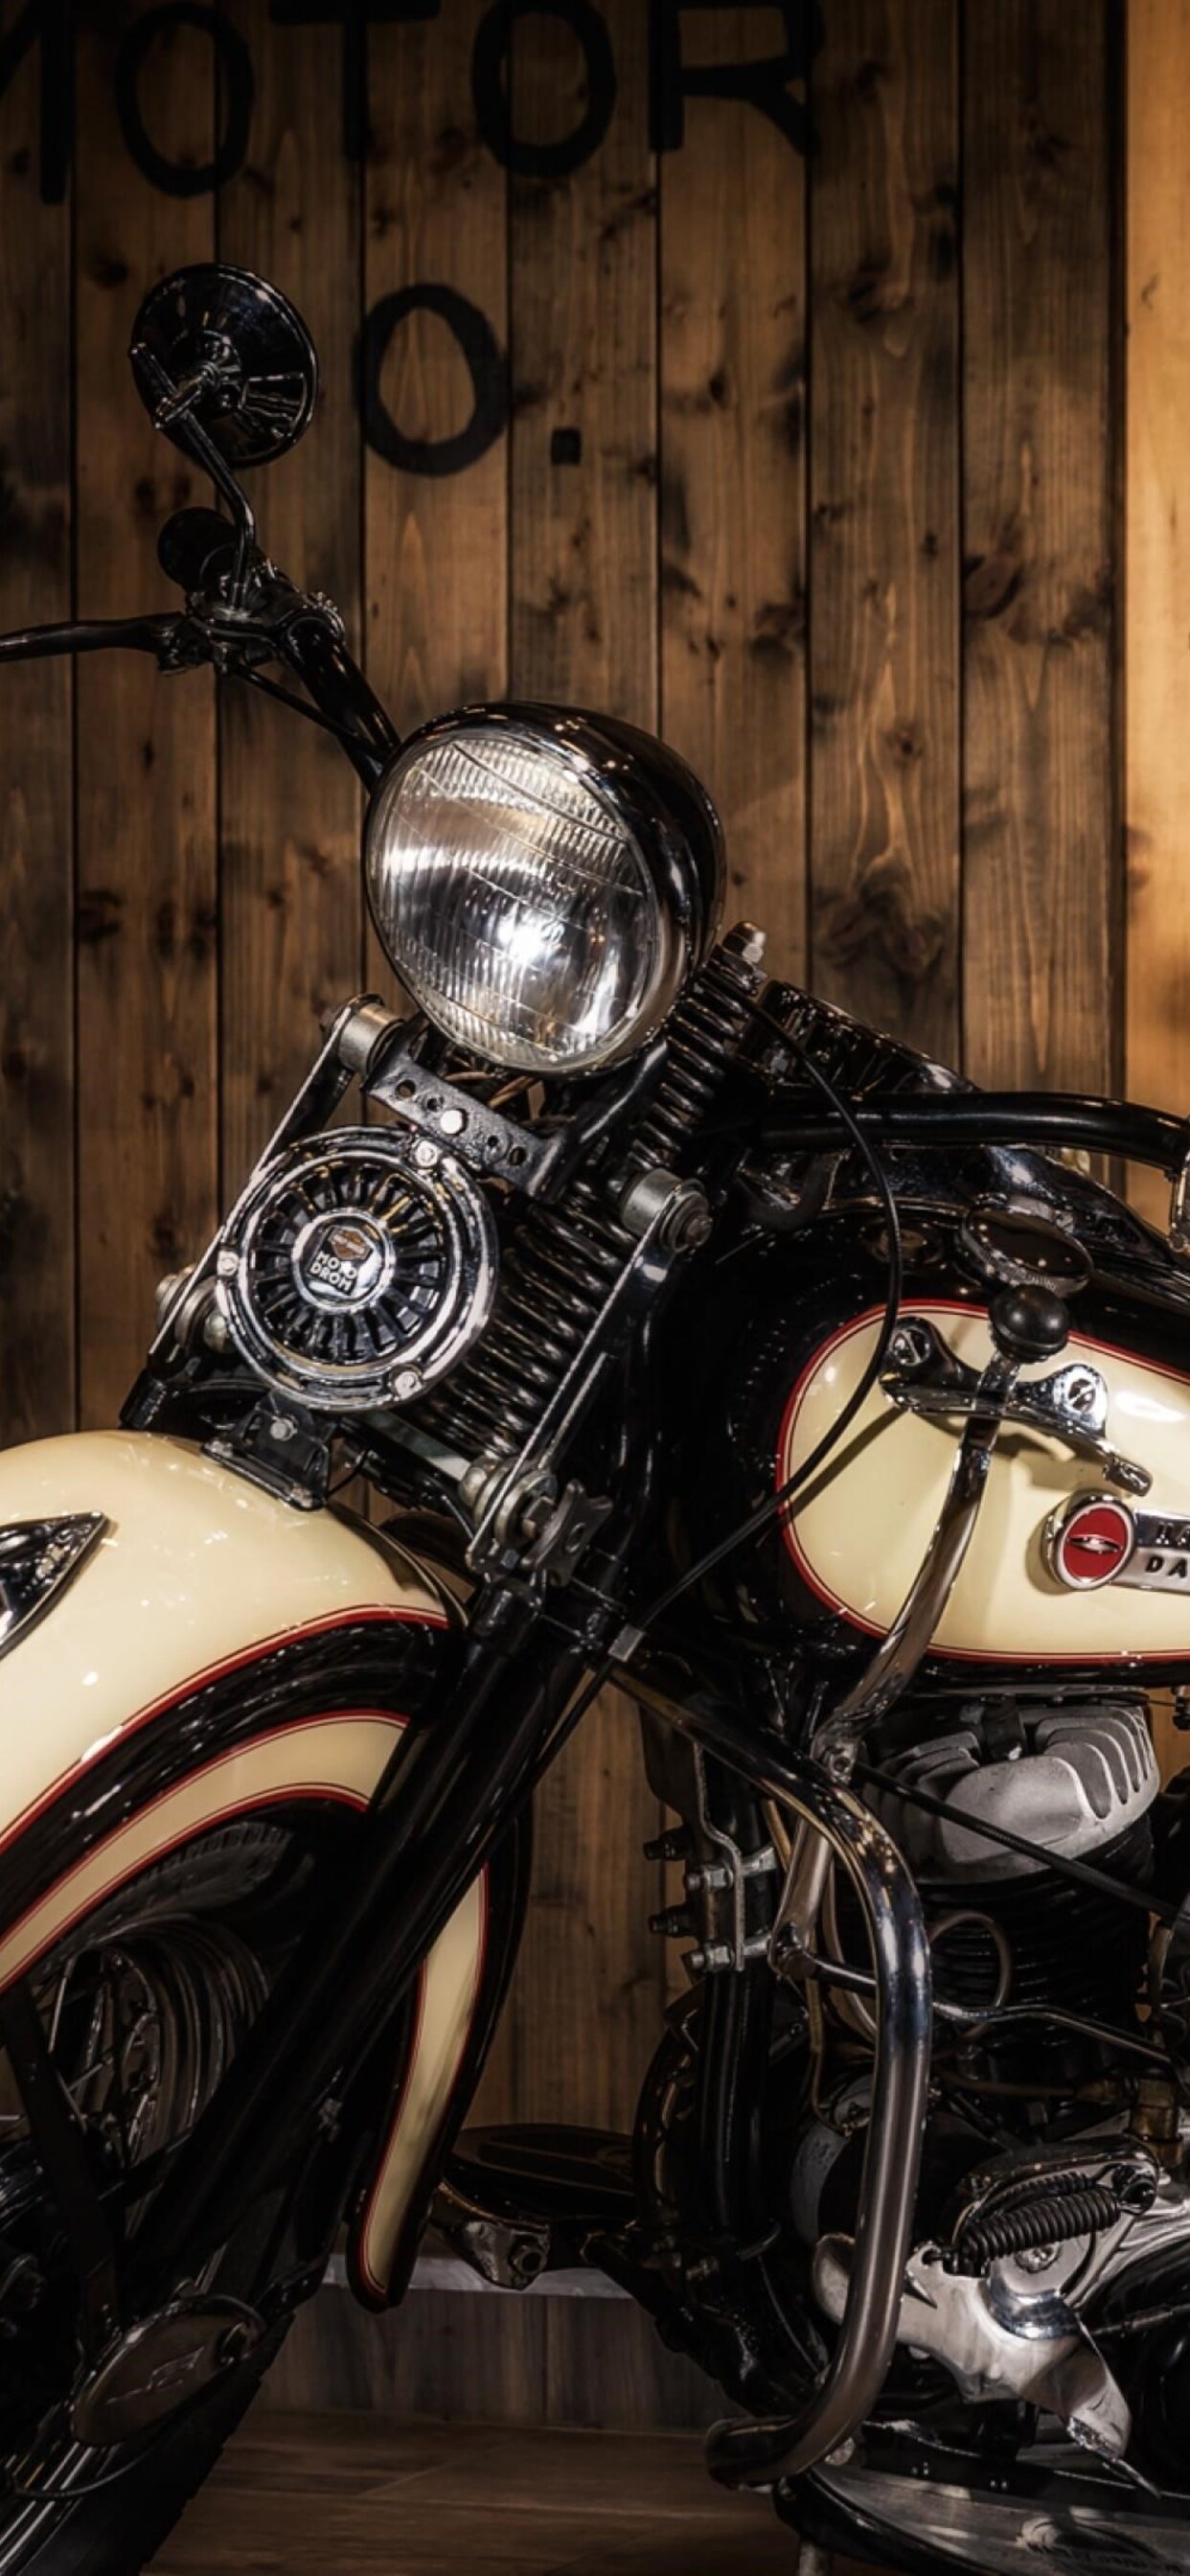 Harley-Davidson, HD wallpapers, Iconic motorcycles, Biker culture, 1250x2690 HD Phone